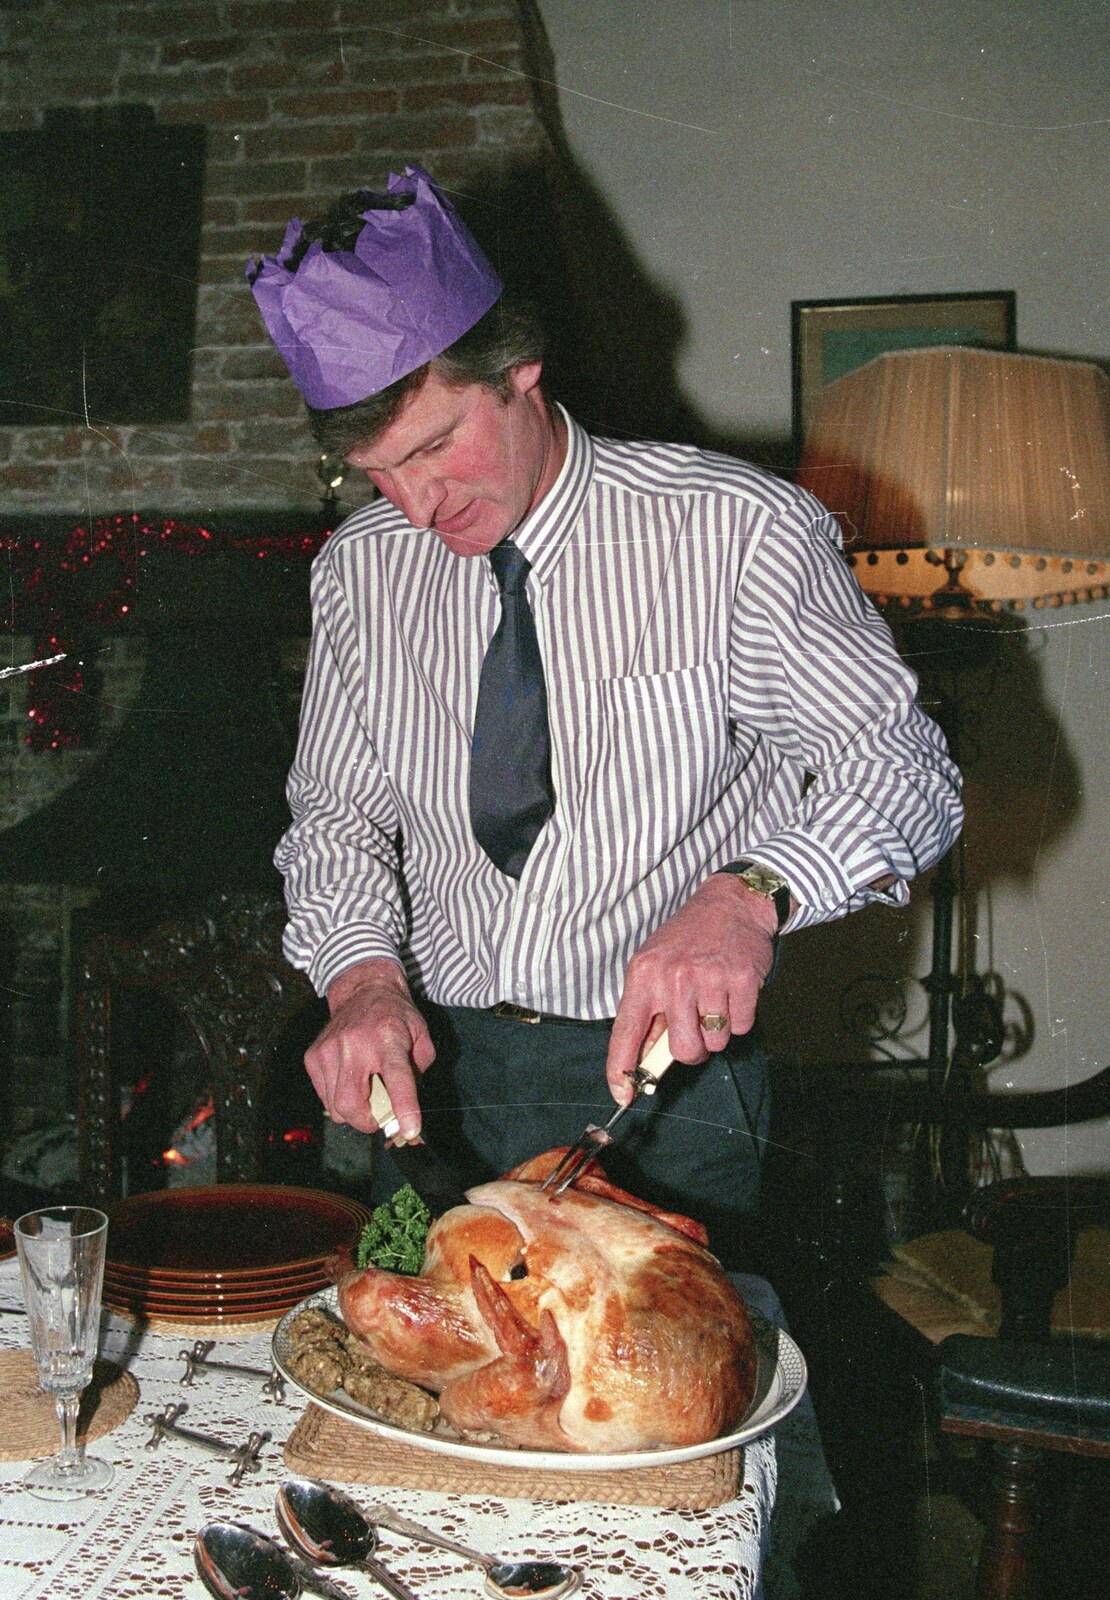 Geoff carves up the turkey from Christmas Dinner with Geoff and Brenda, Stuston, Suffolk - 25th December 1990